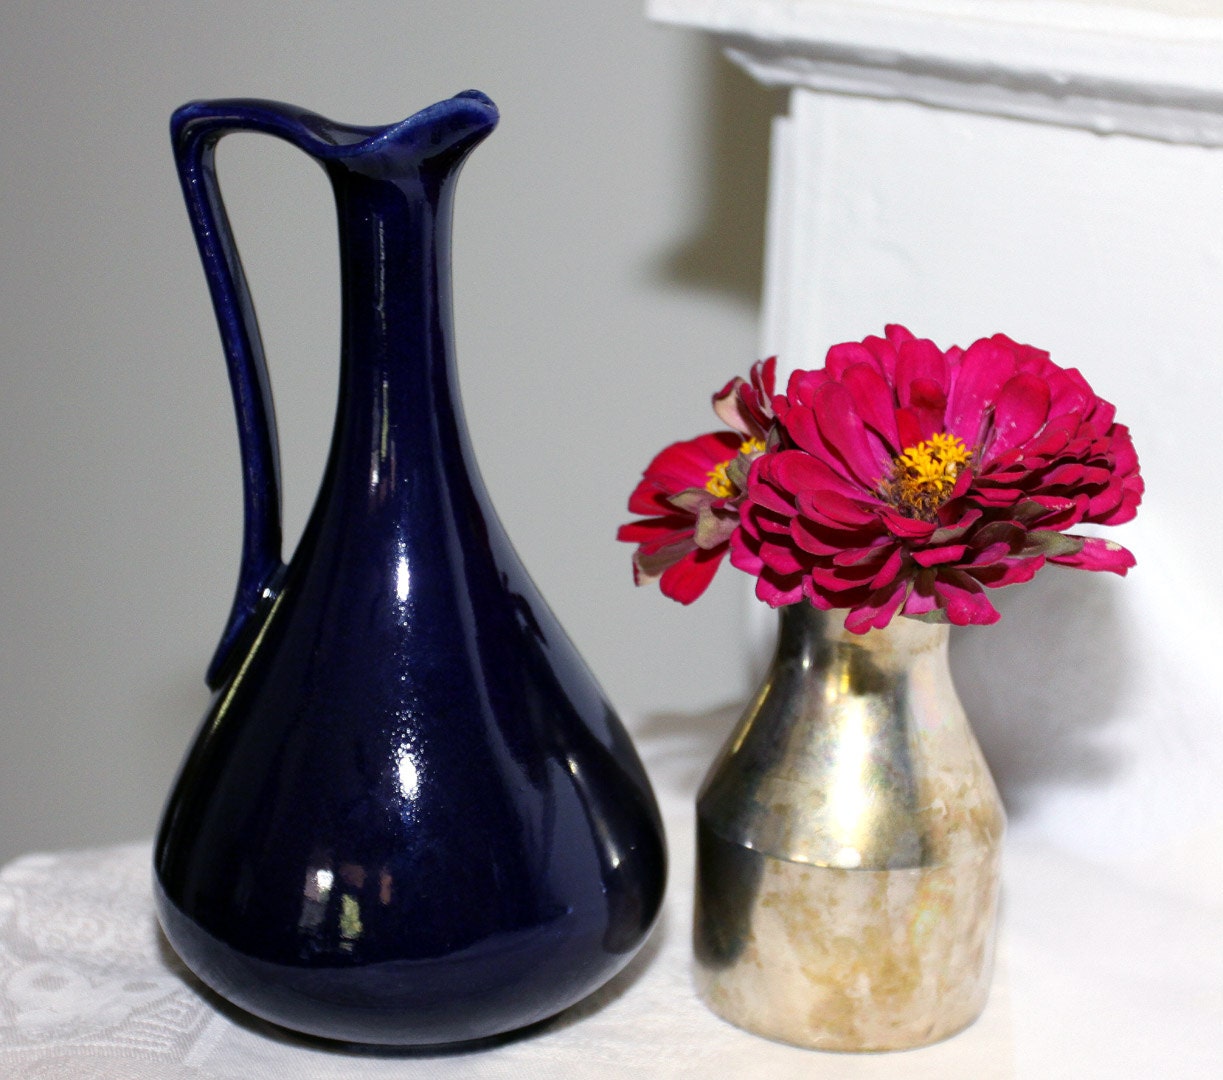 Vintage French Cobalt Blue Pottery Pitcher by NewOrleansEclectics